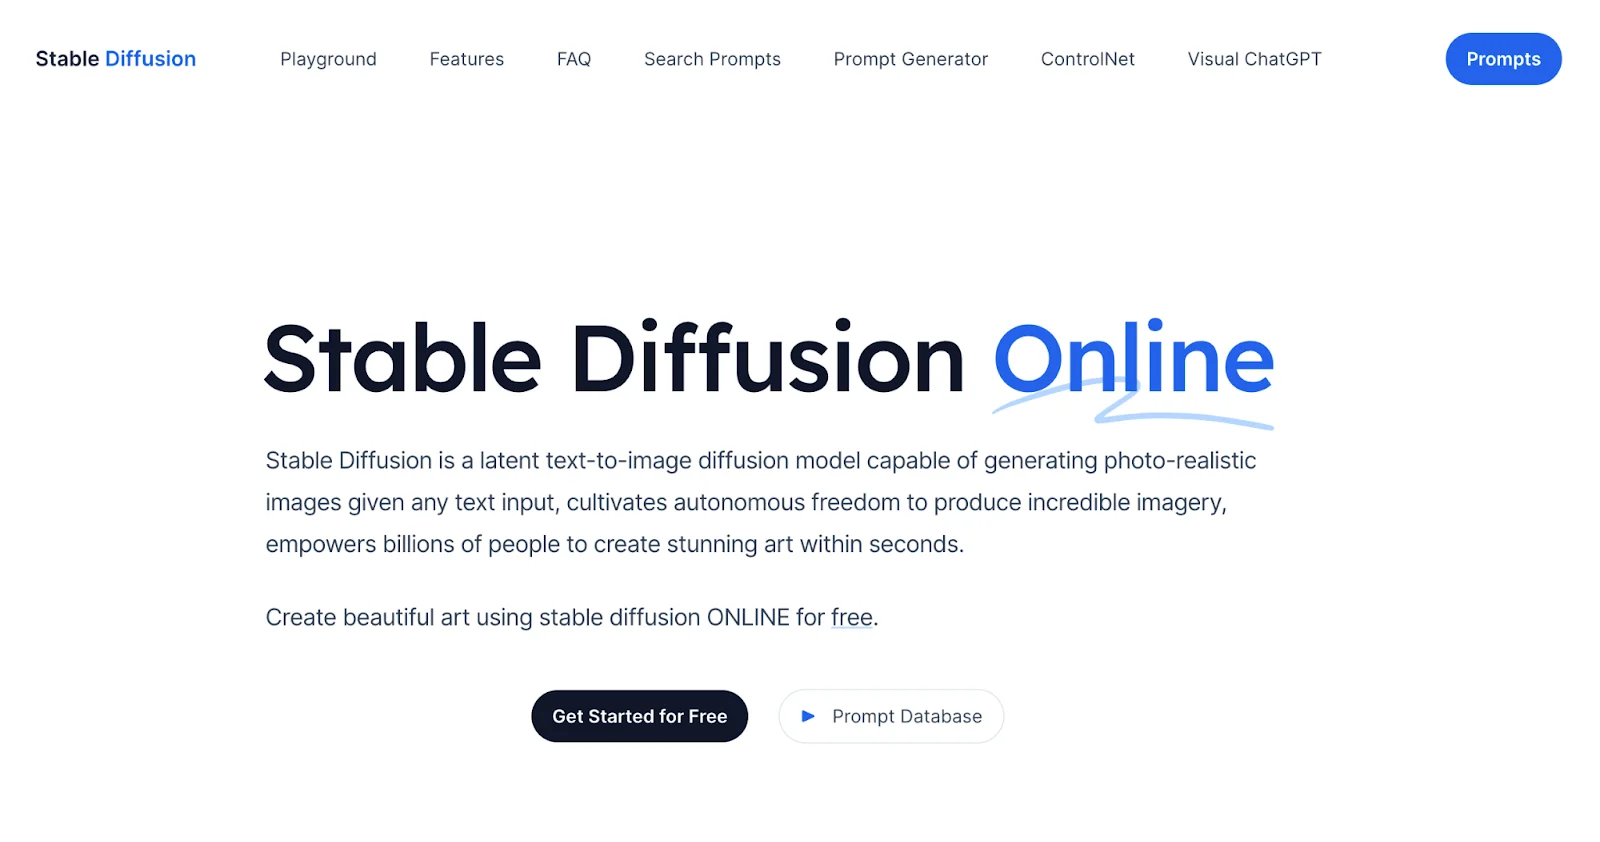 Stable Diffusion Online Get Started Free